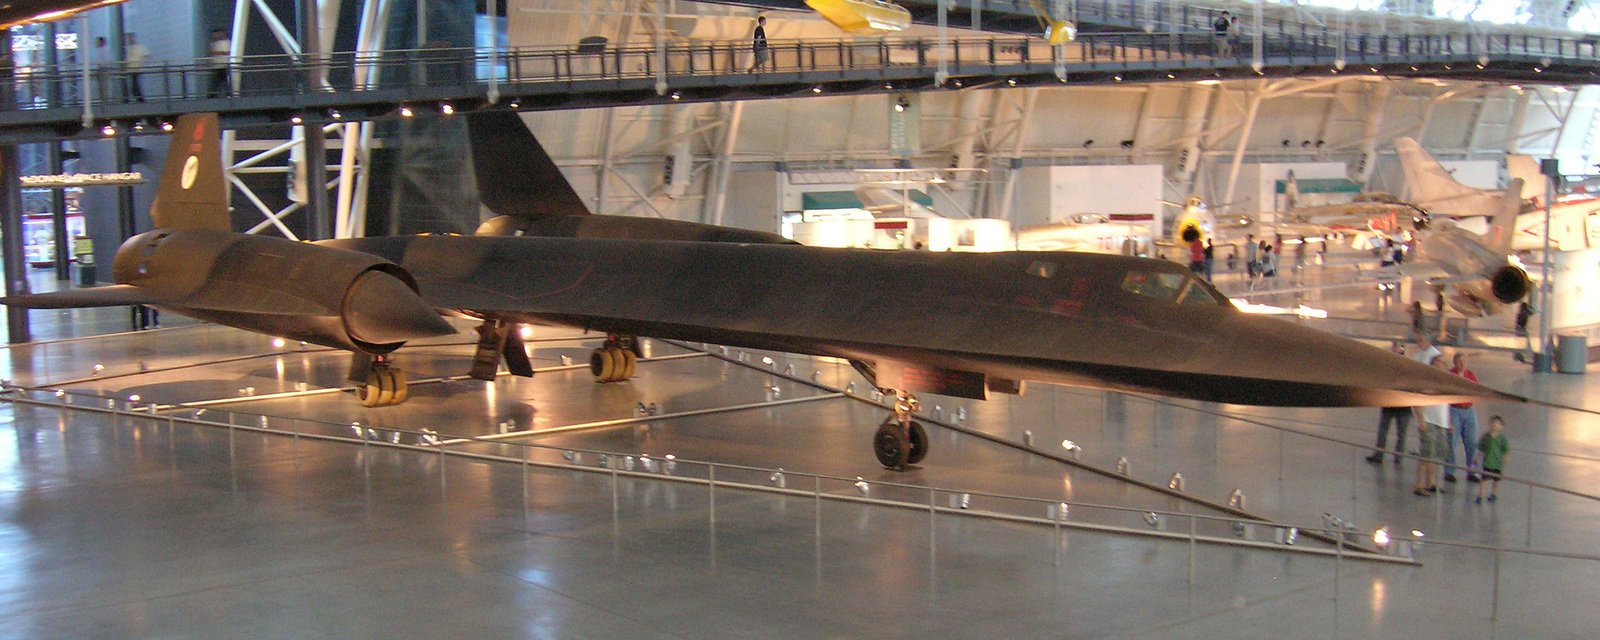 the military jet is on display in the air force museum